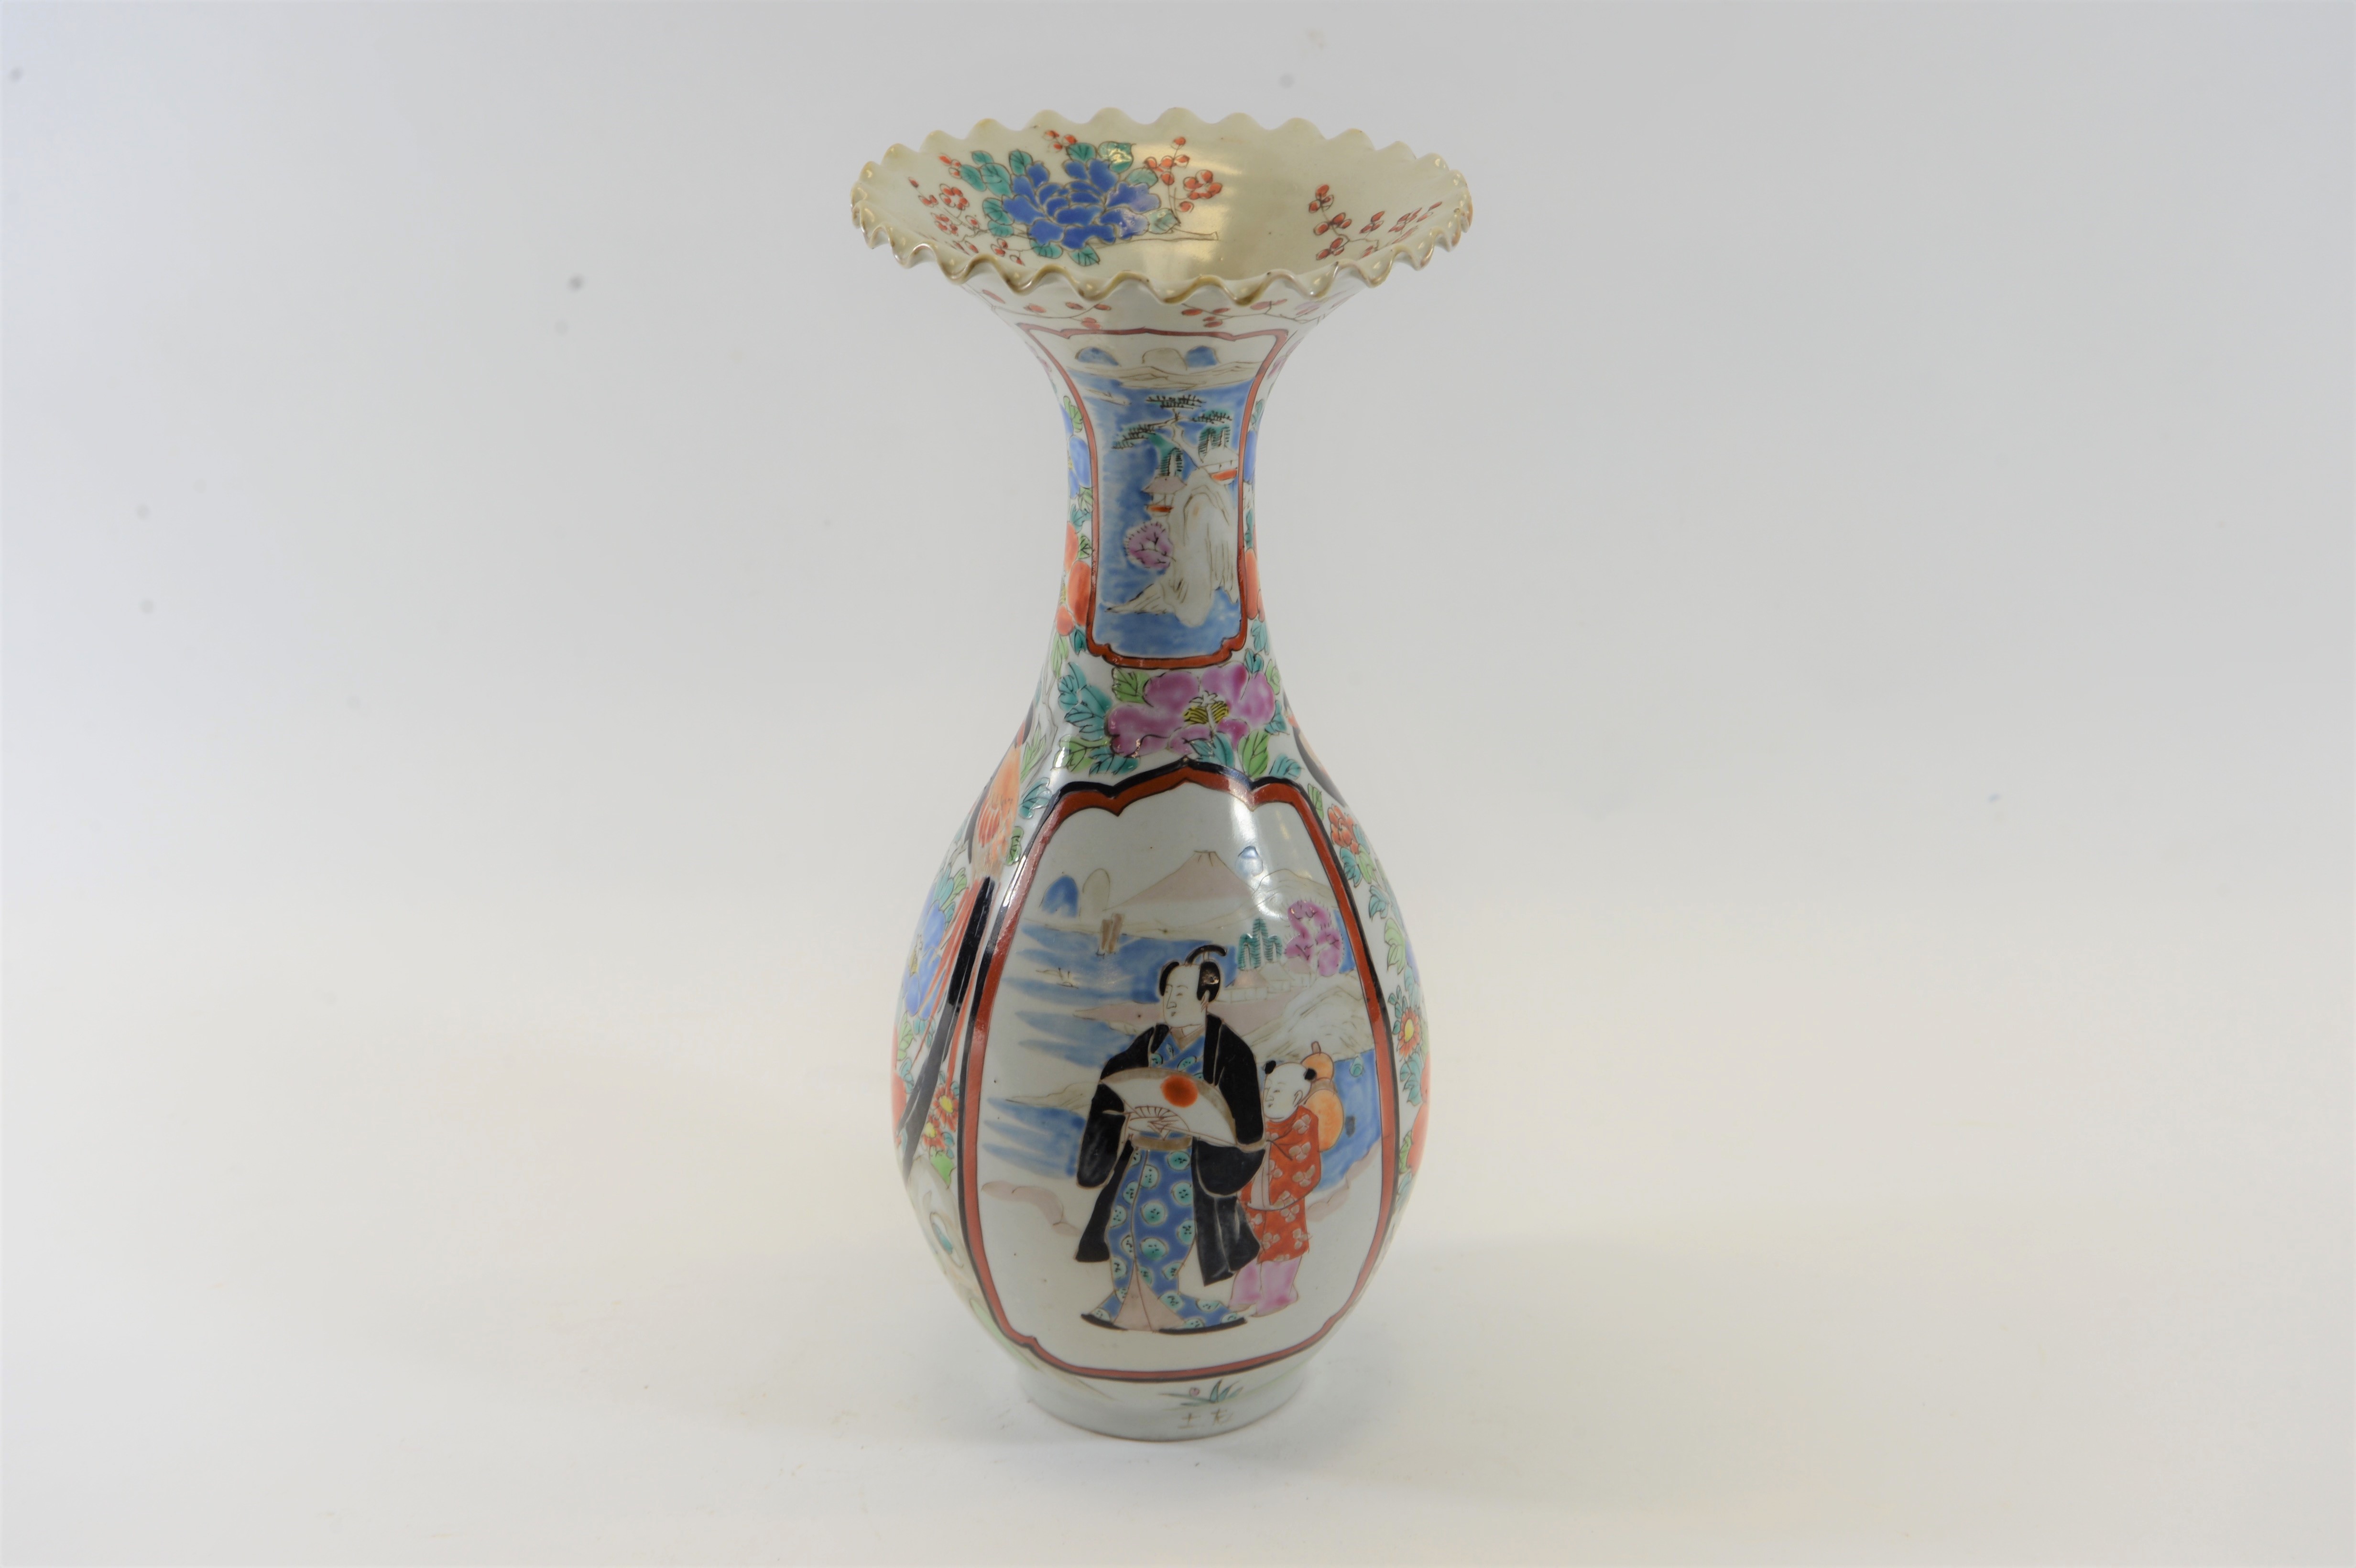 A LATE 19TH/EARLY 20TH CENTURY JAPANESE PORCELAIN VASE decorated with bijn, 11 3/4 ins high,